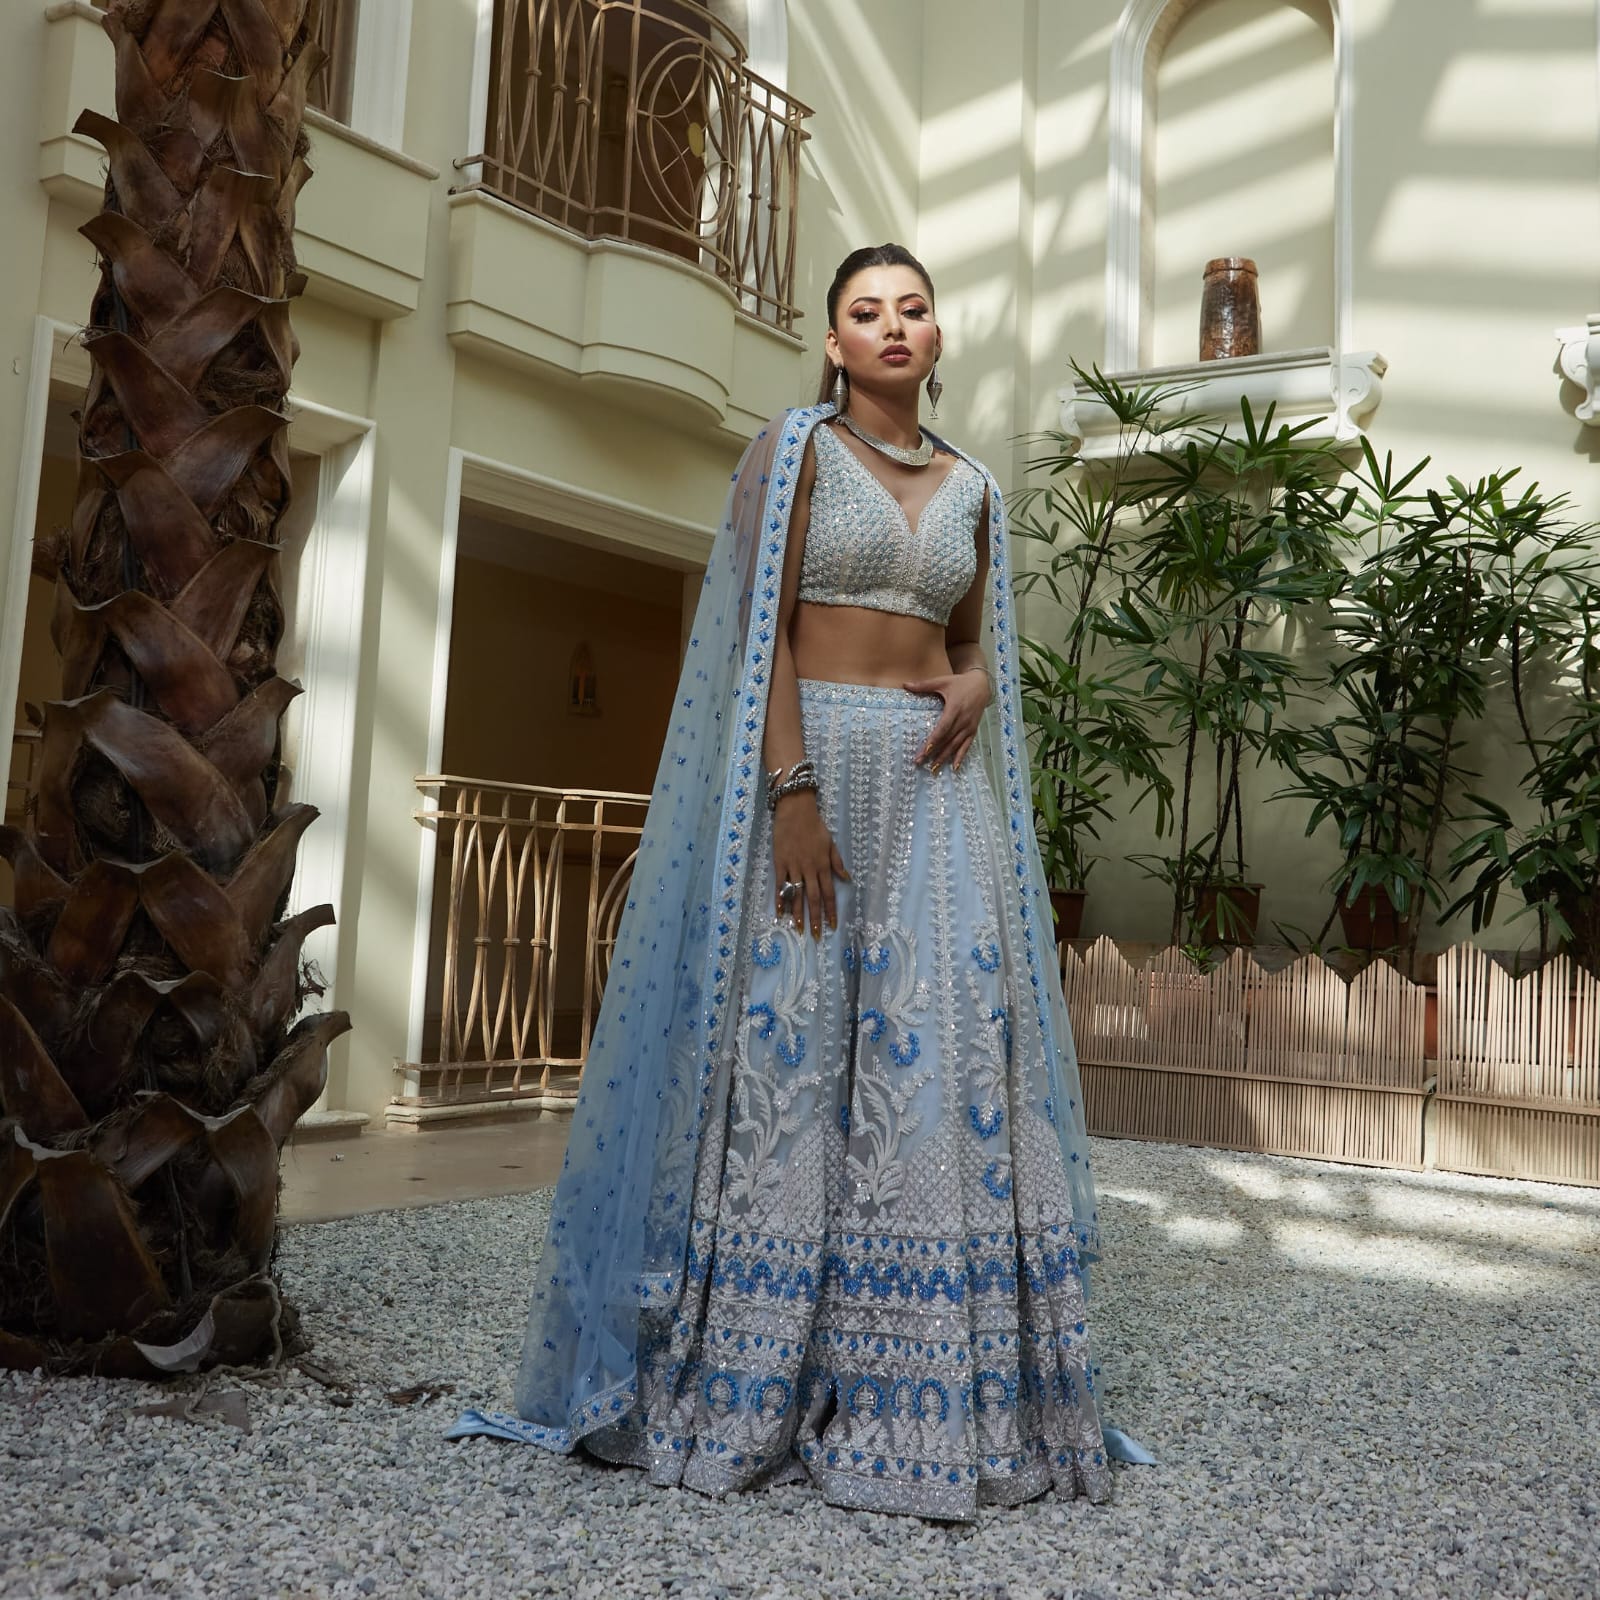 Urvashi looked absolutely beautiful in the shimmery summer lehenga with a mix of pastel hues, the sheer dupatta, and the tassels.